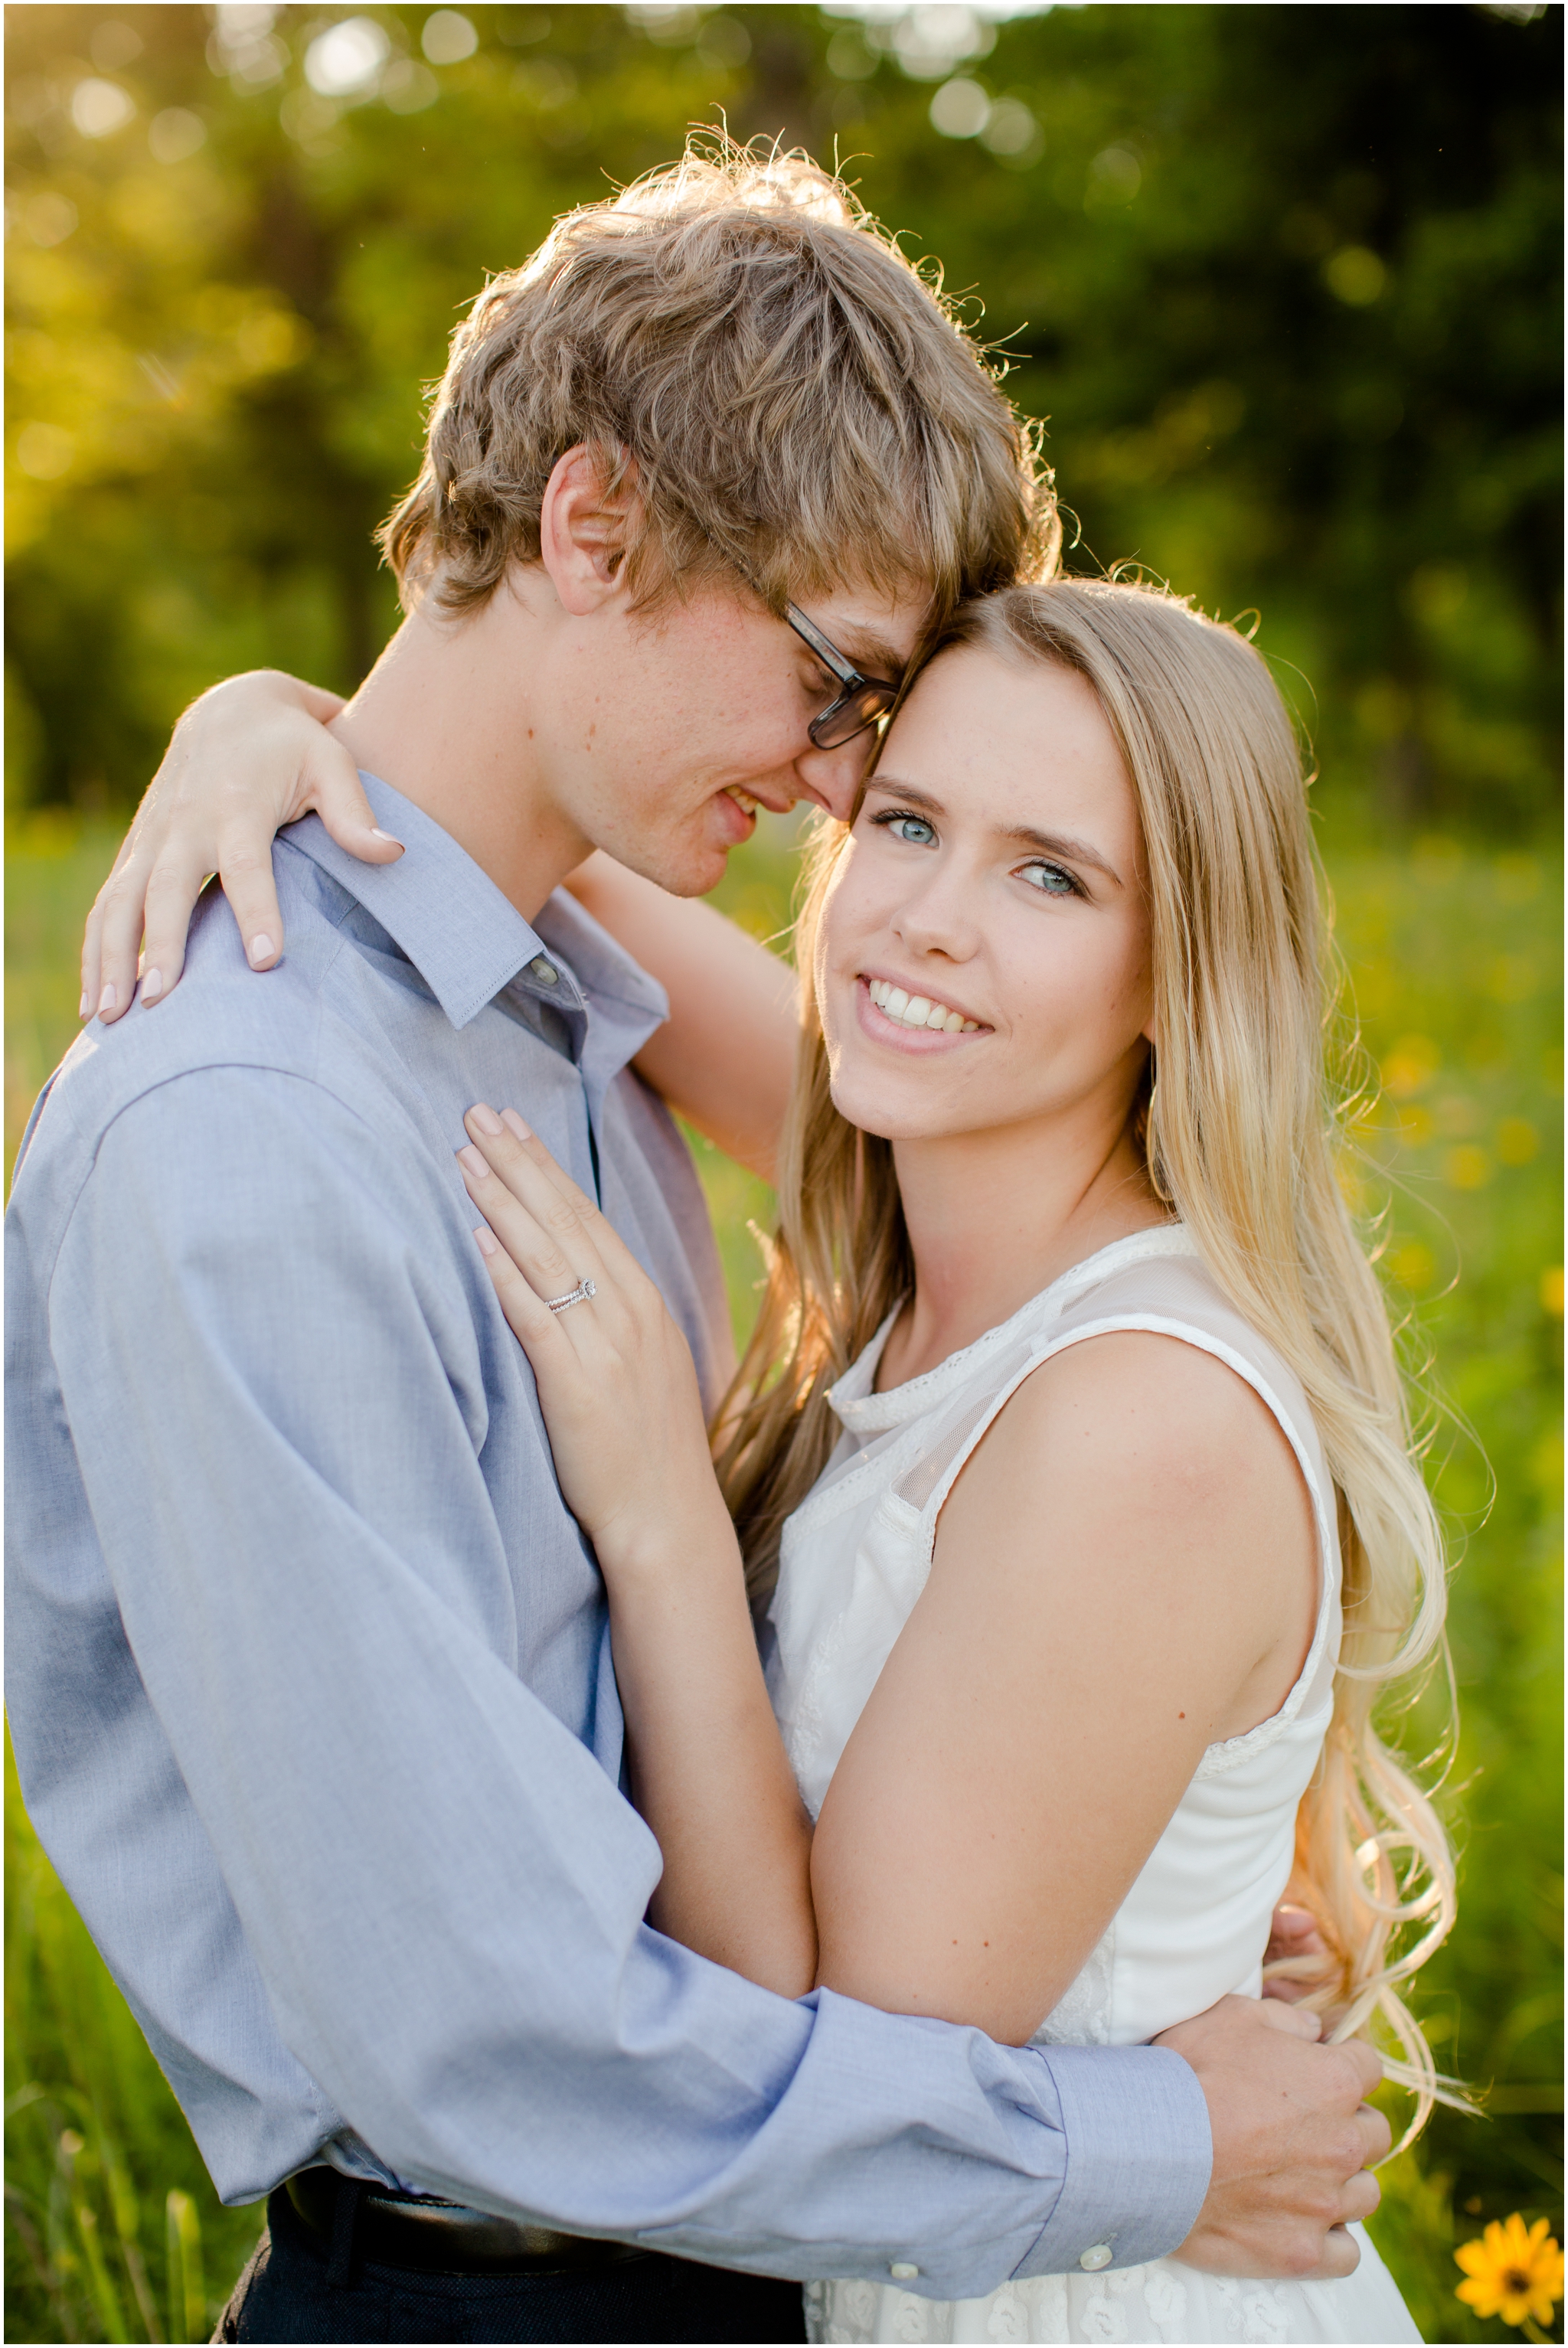 Detroit Lakes Engagement Photos, Brittney and Caleb